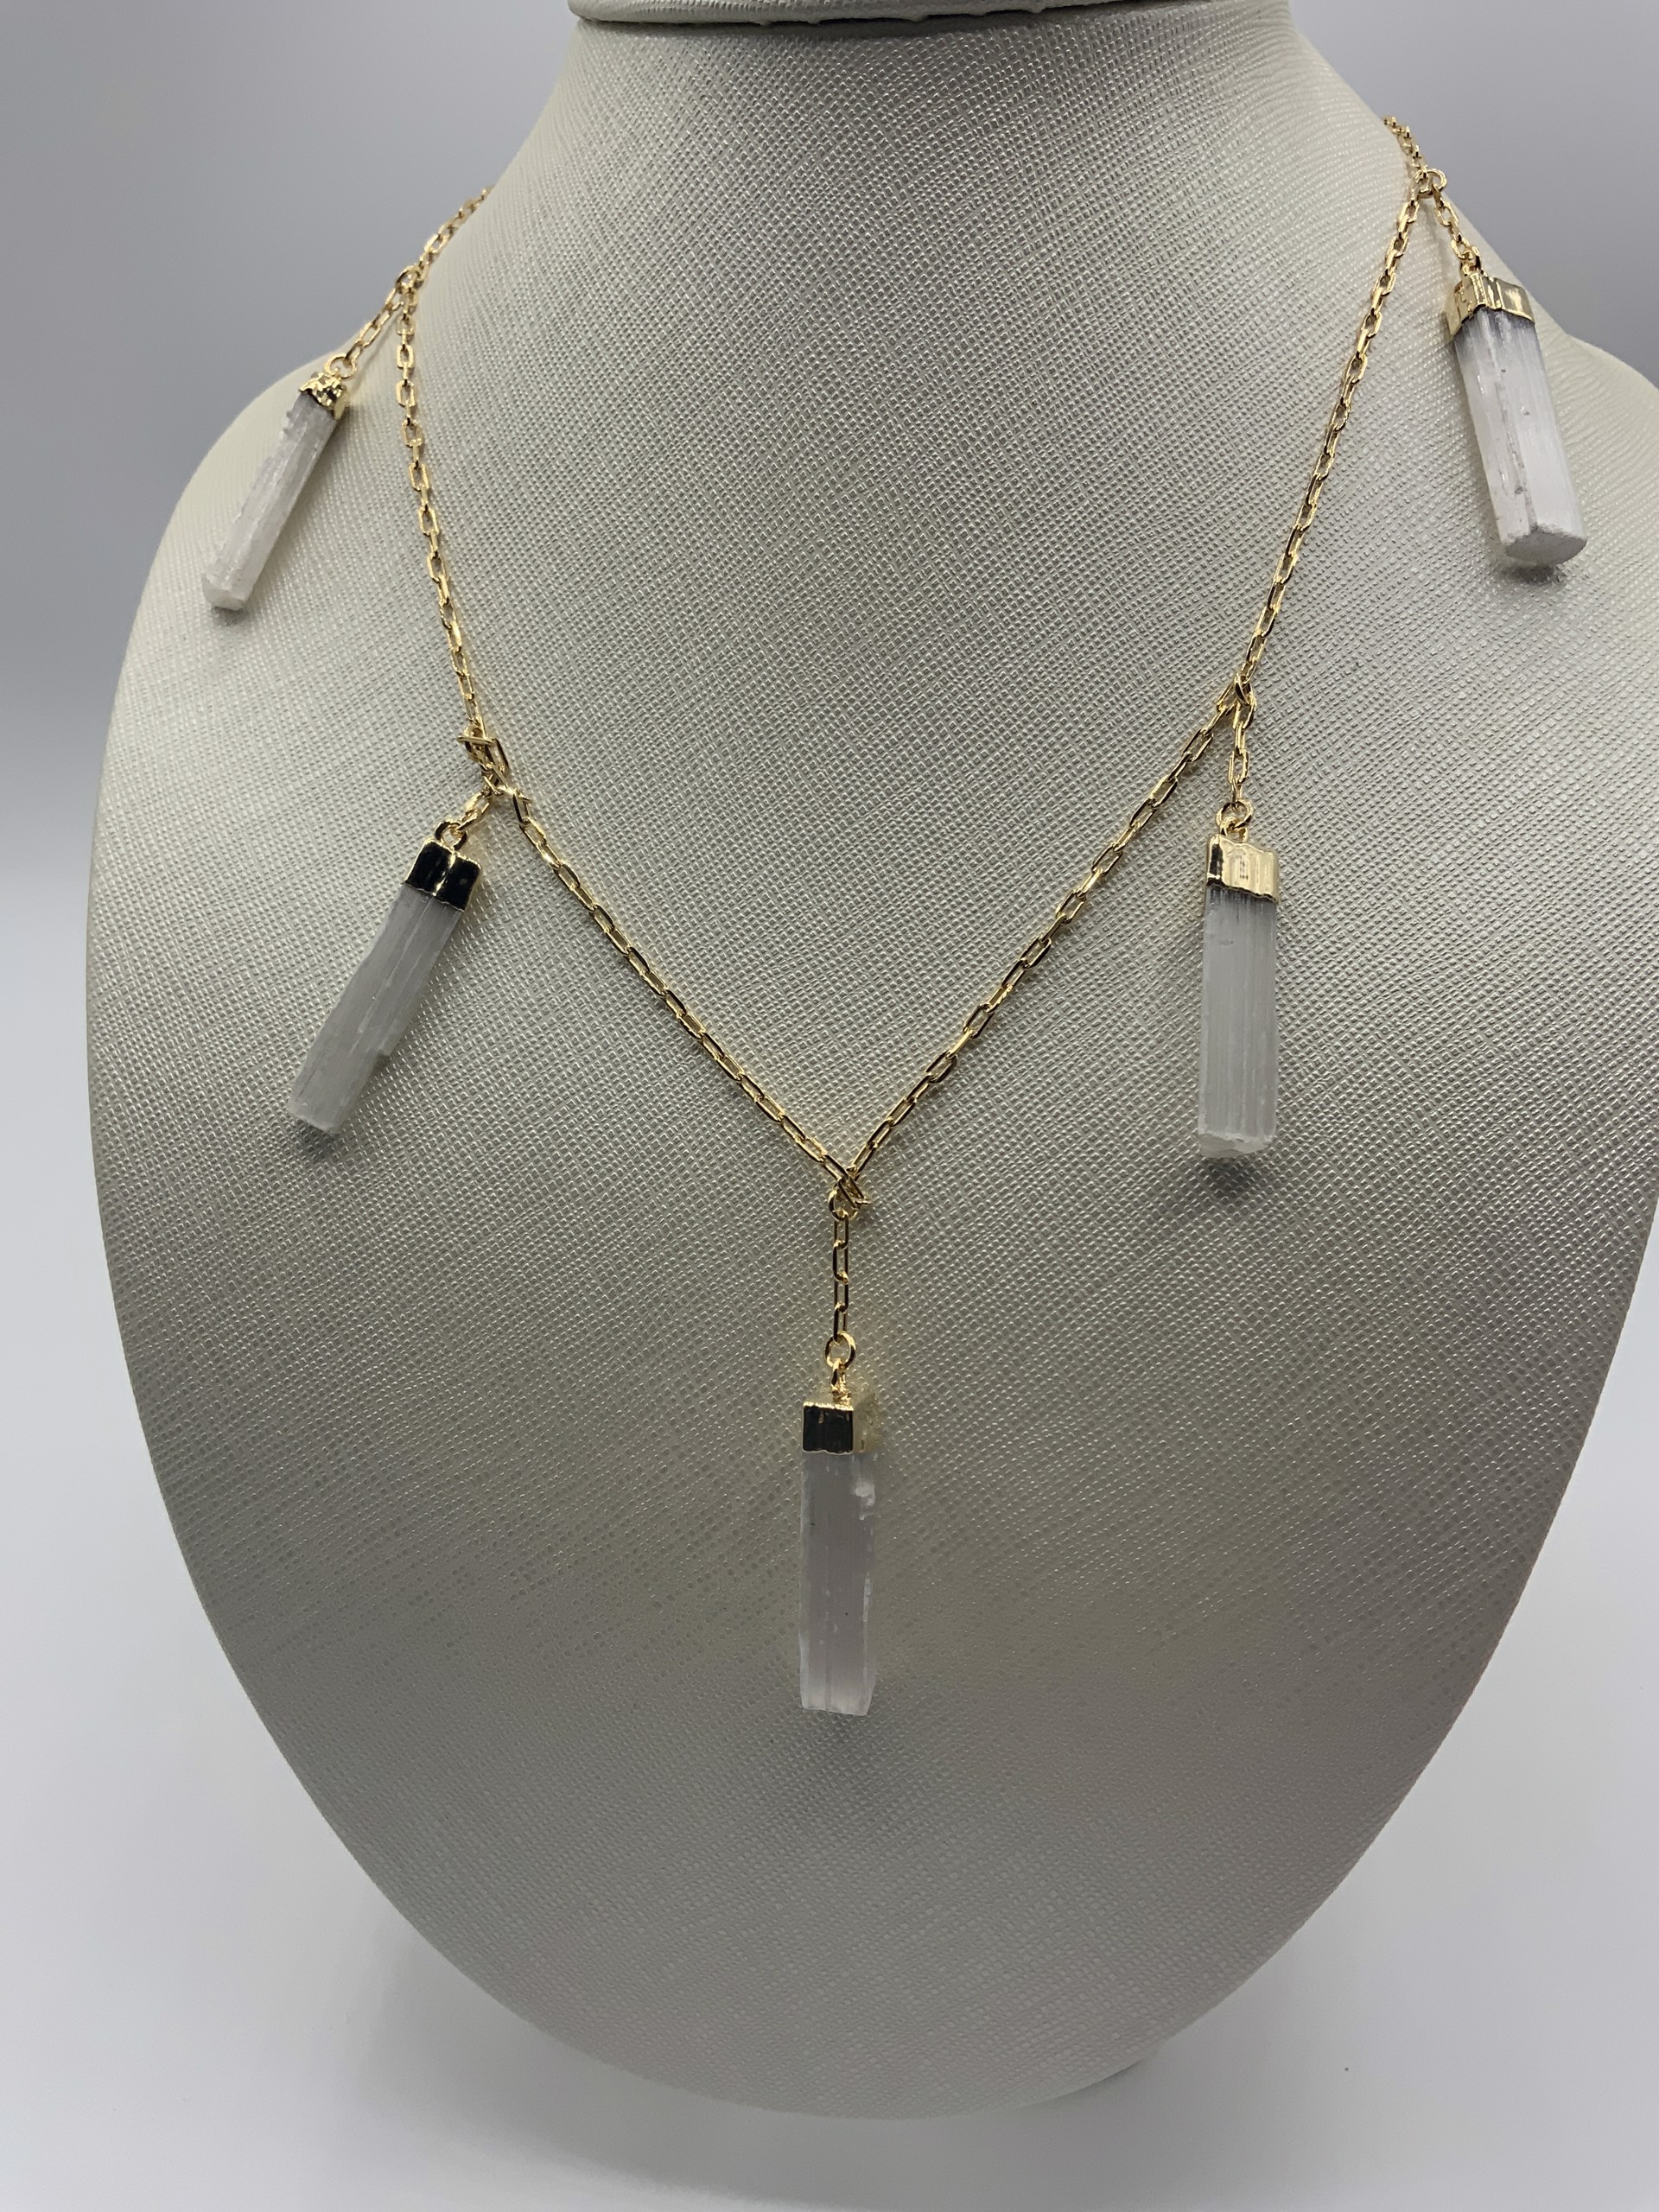 5 stone single Selenite on paperclip chain by M&Co.